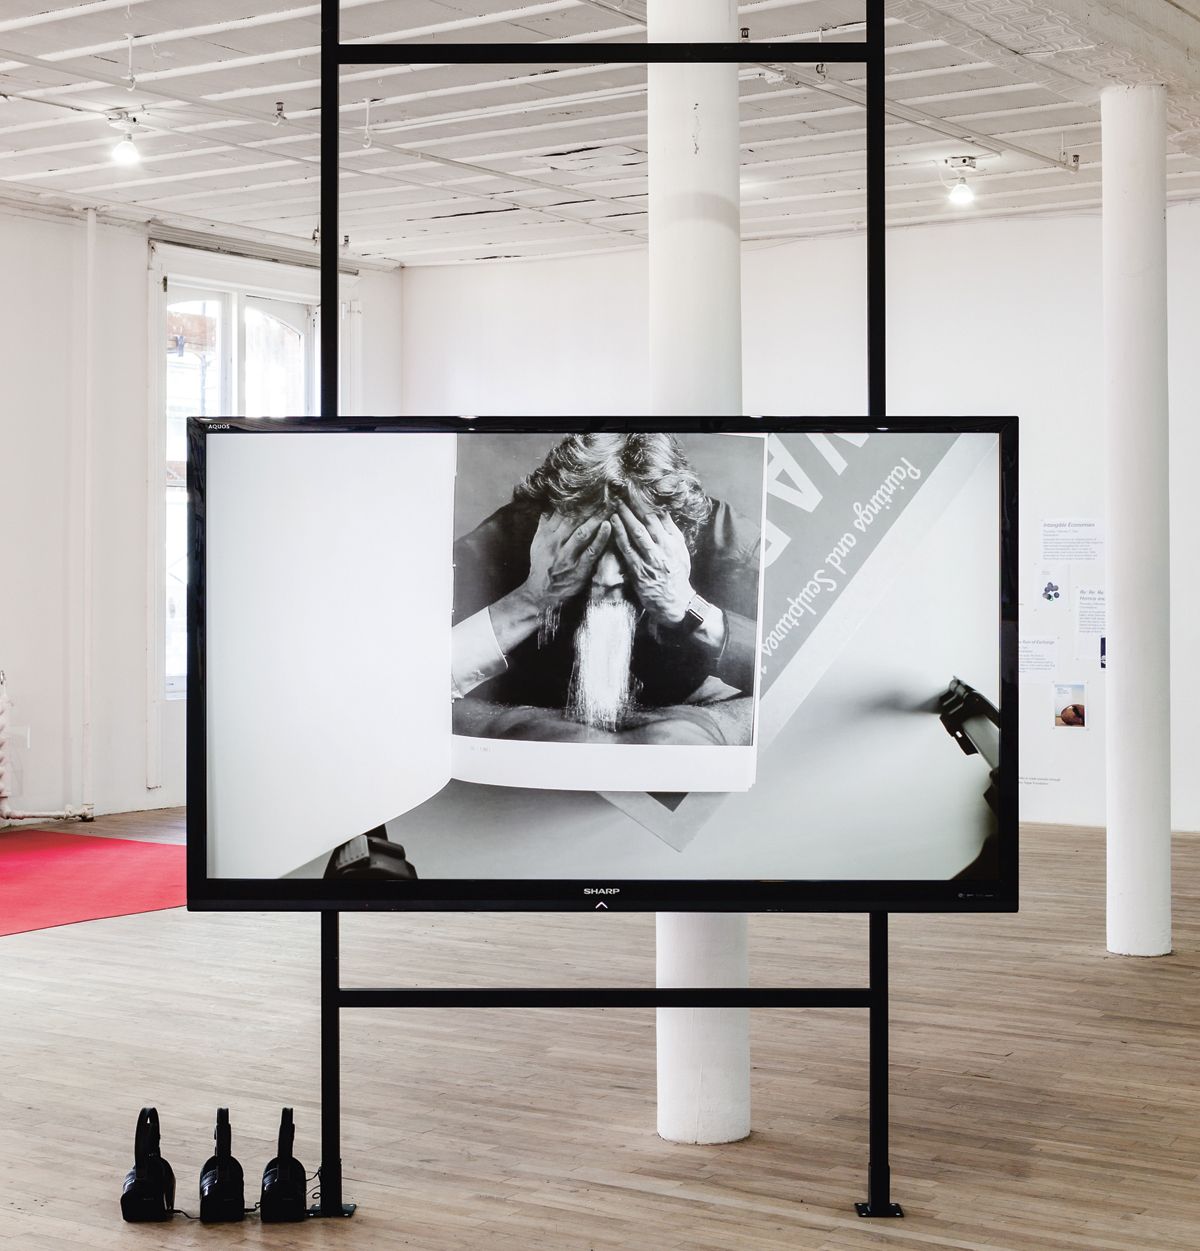 Rosebud, 2013, video. Installation view. Courtesy: James Richards and Rodeo, London